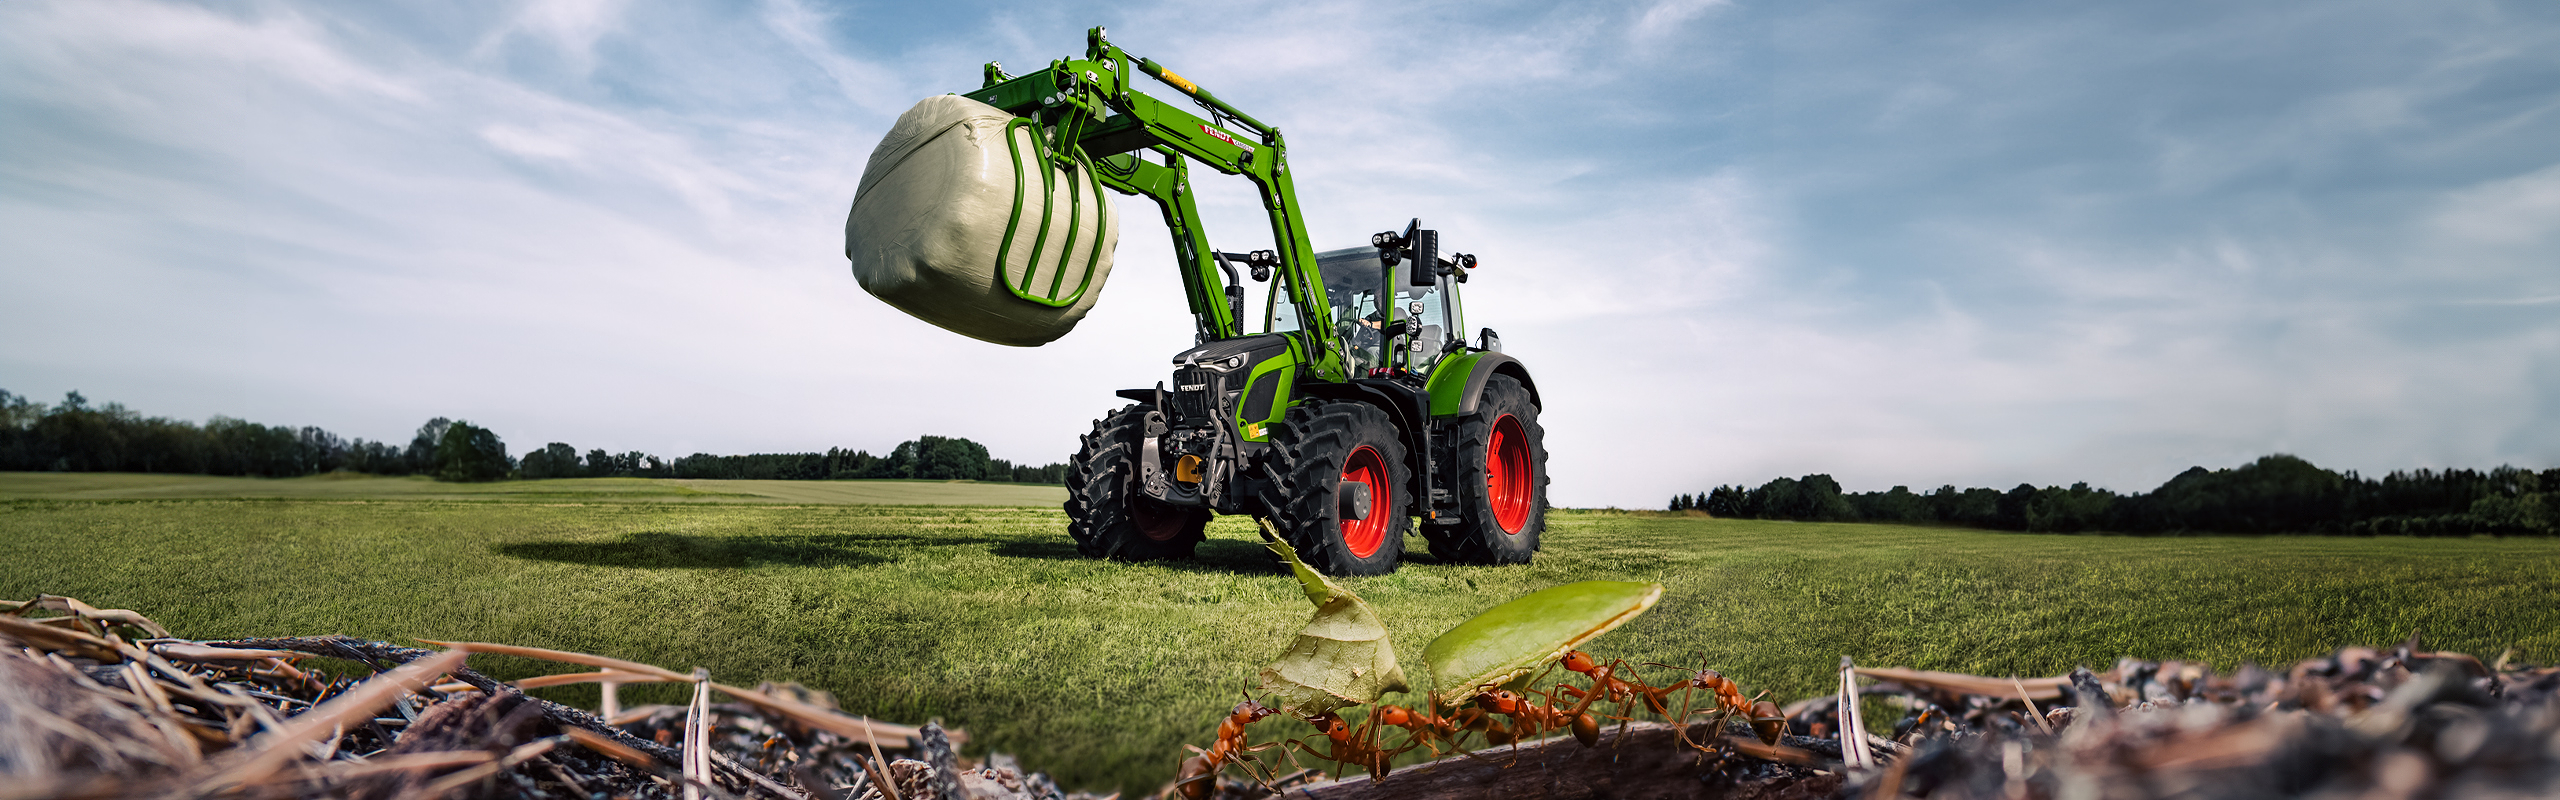 A Fendt 600 Vario tractor stands in the field and lifts a silo bale. Ants can be seen in the foreground.